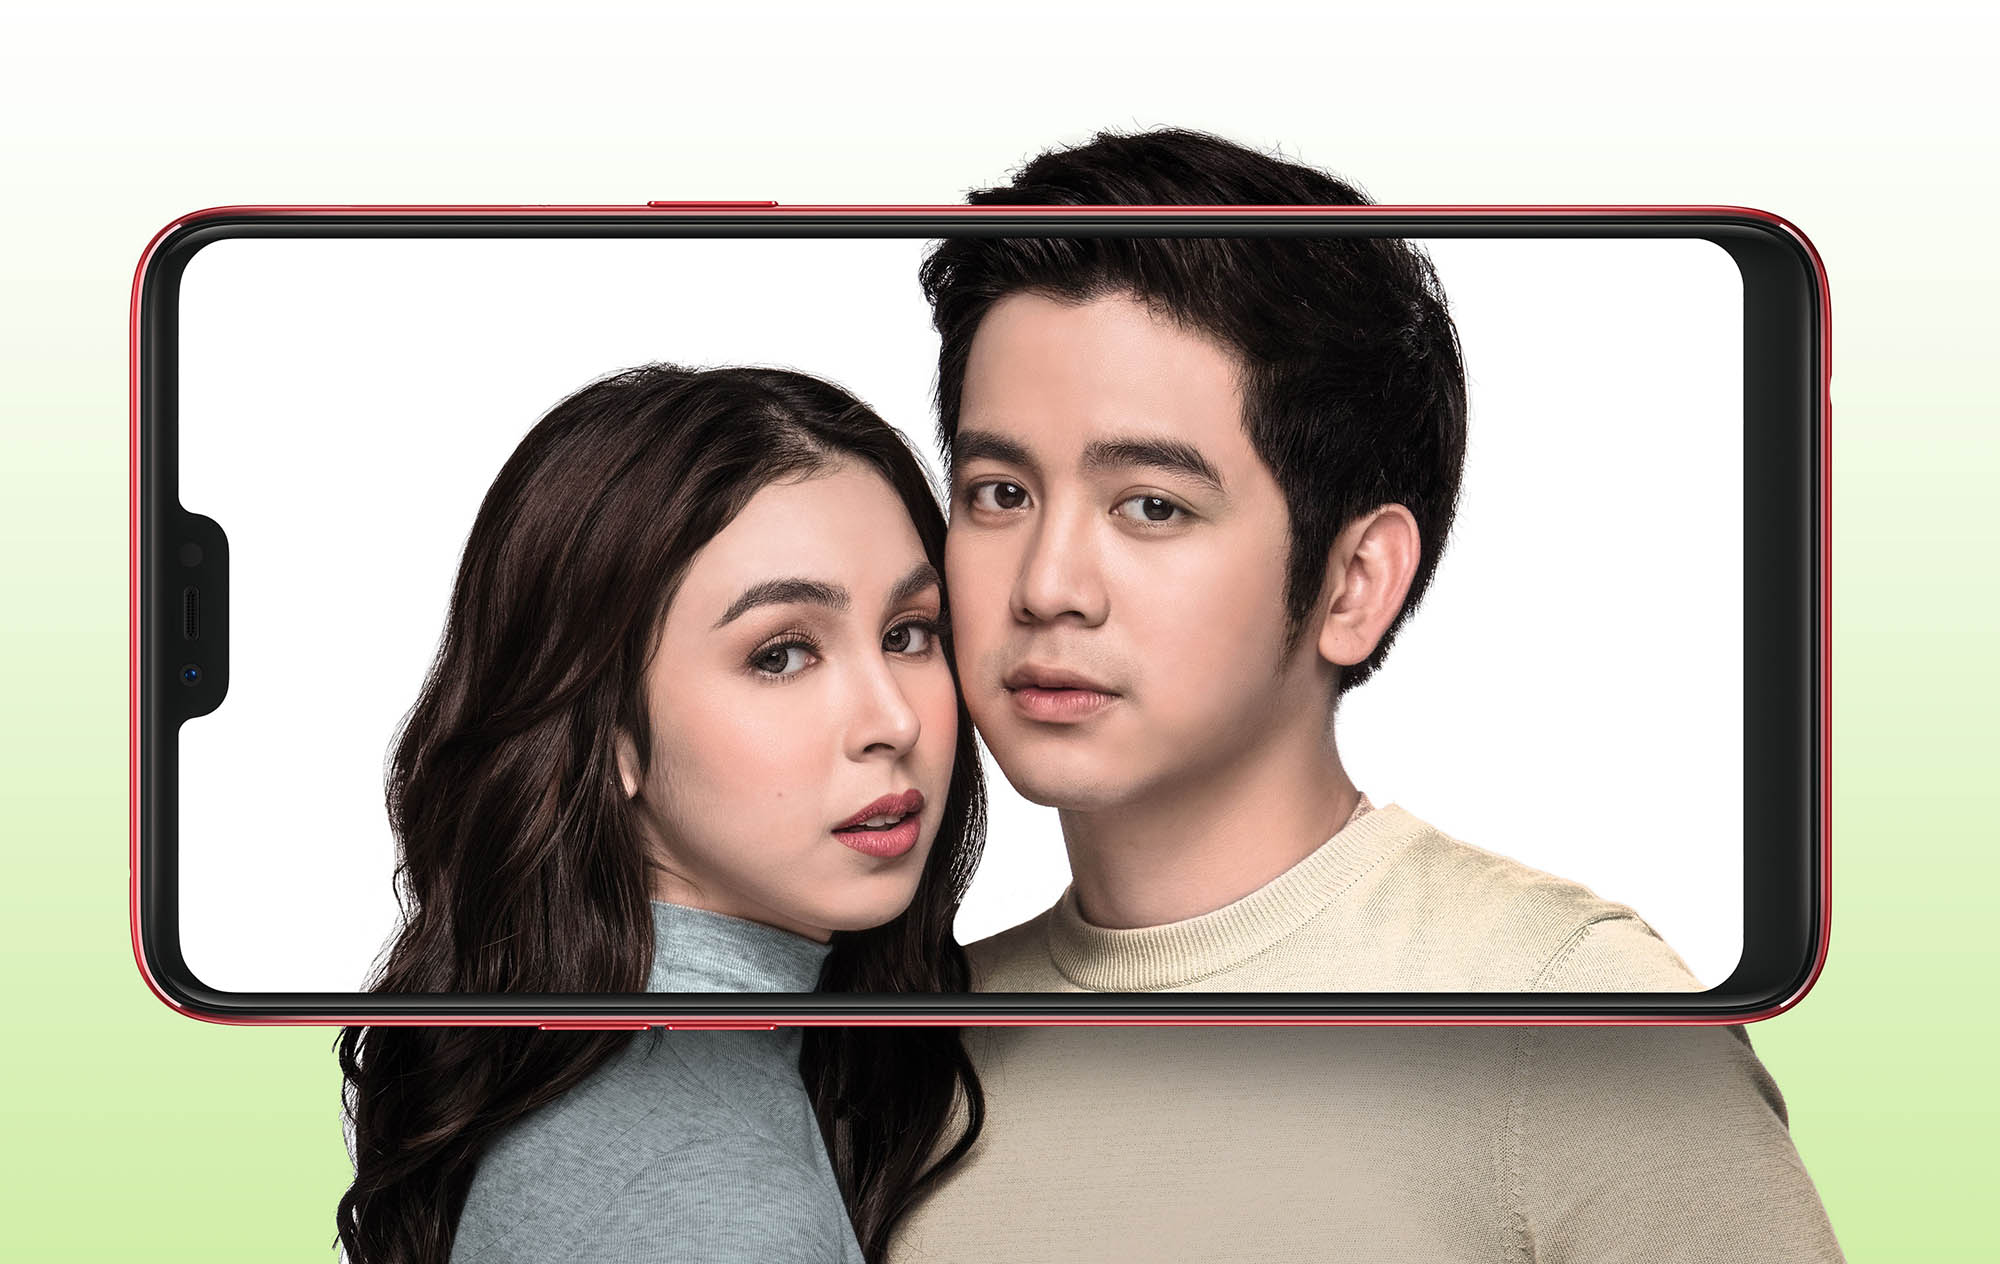 OPPO F7 officially introduced by JoshLia and Pre-Order starts on April 12